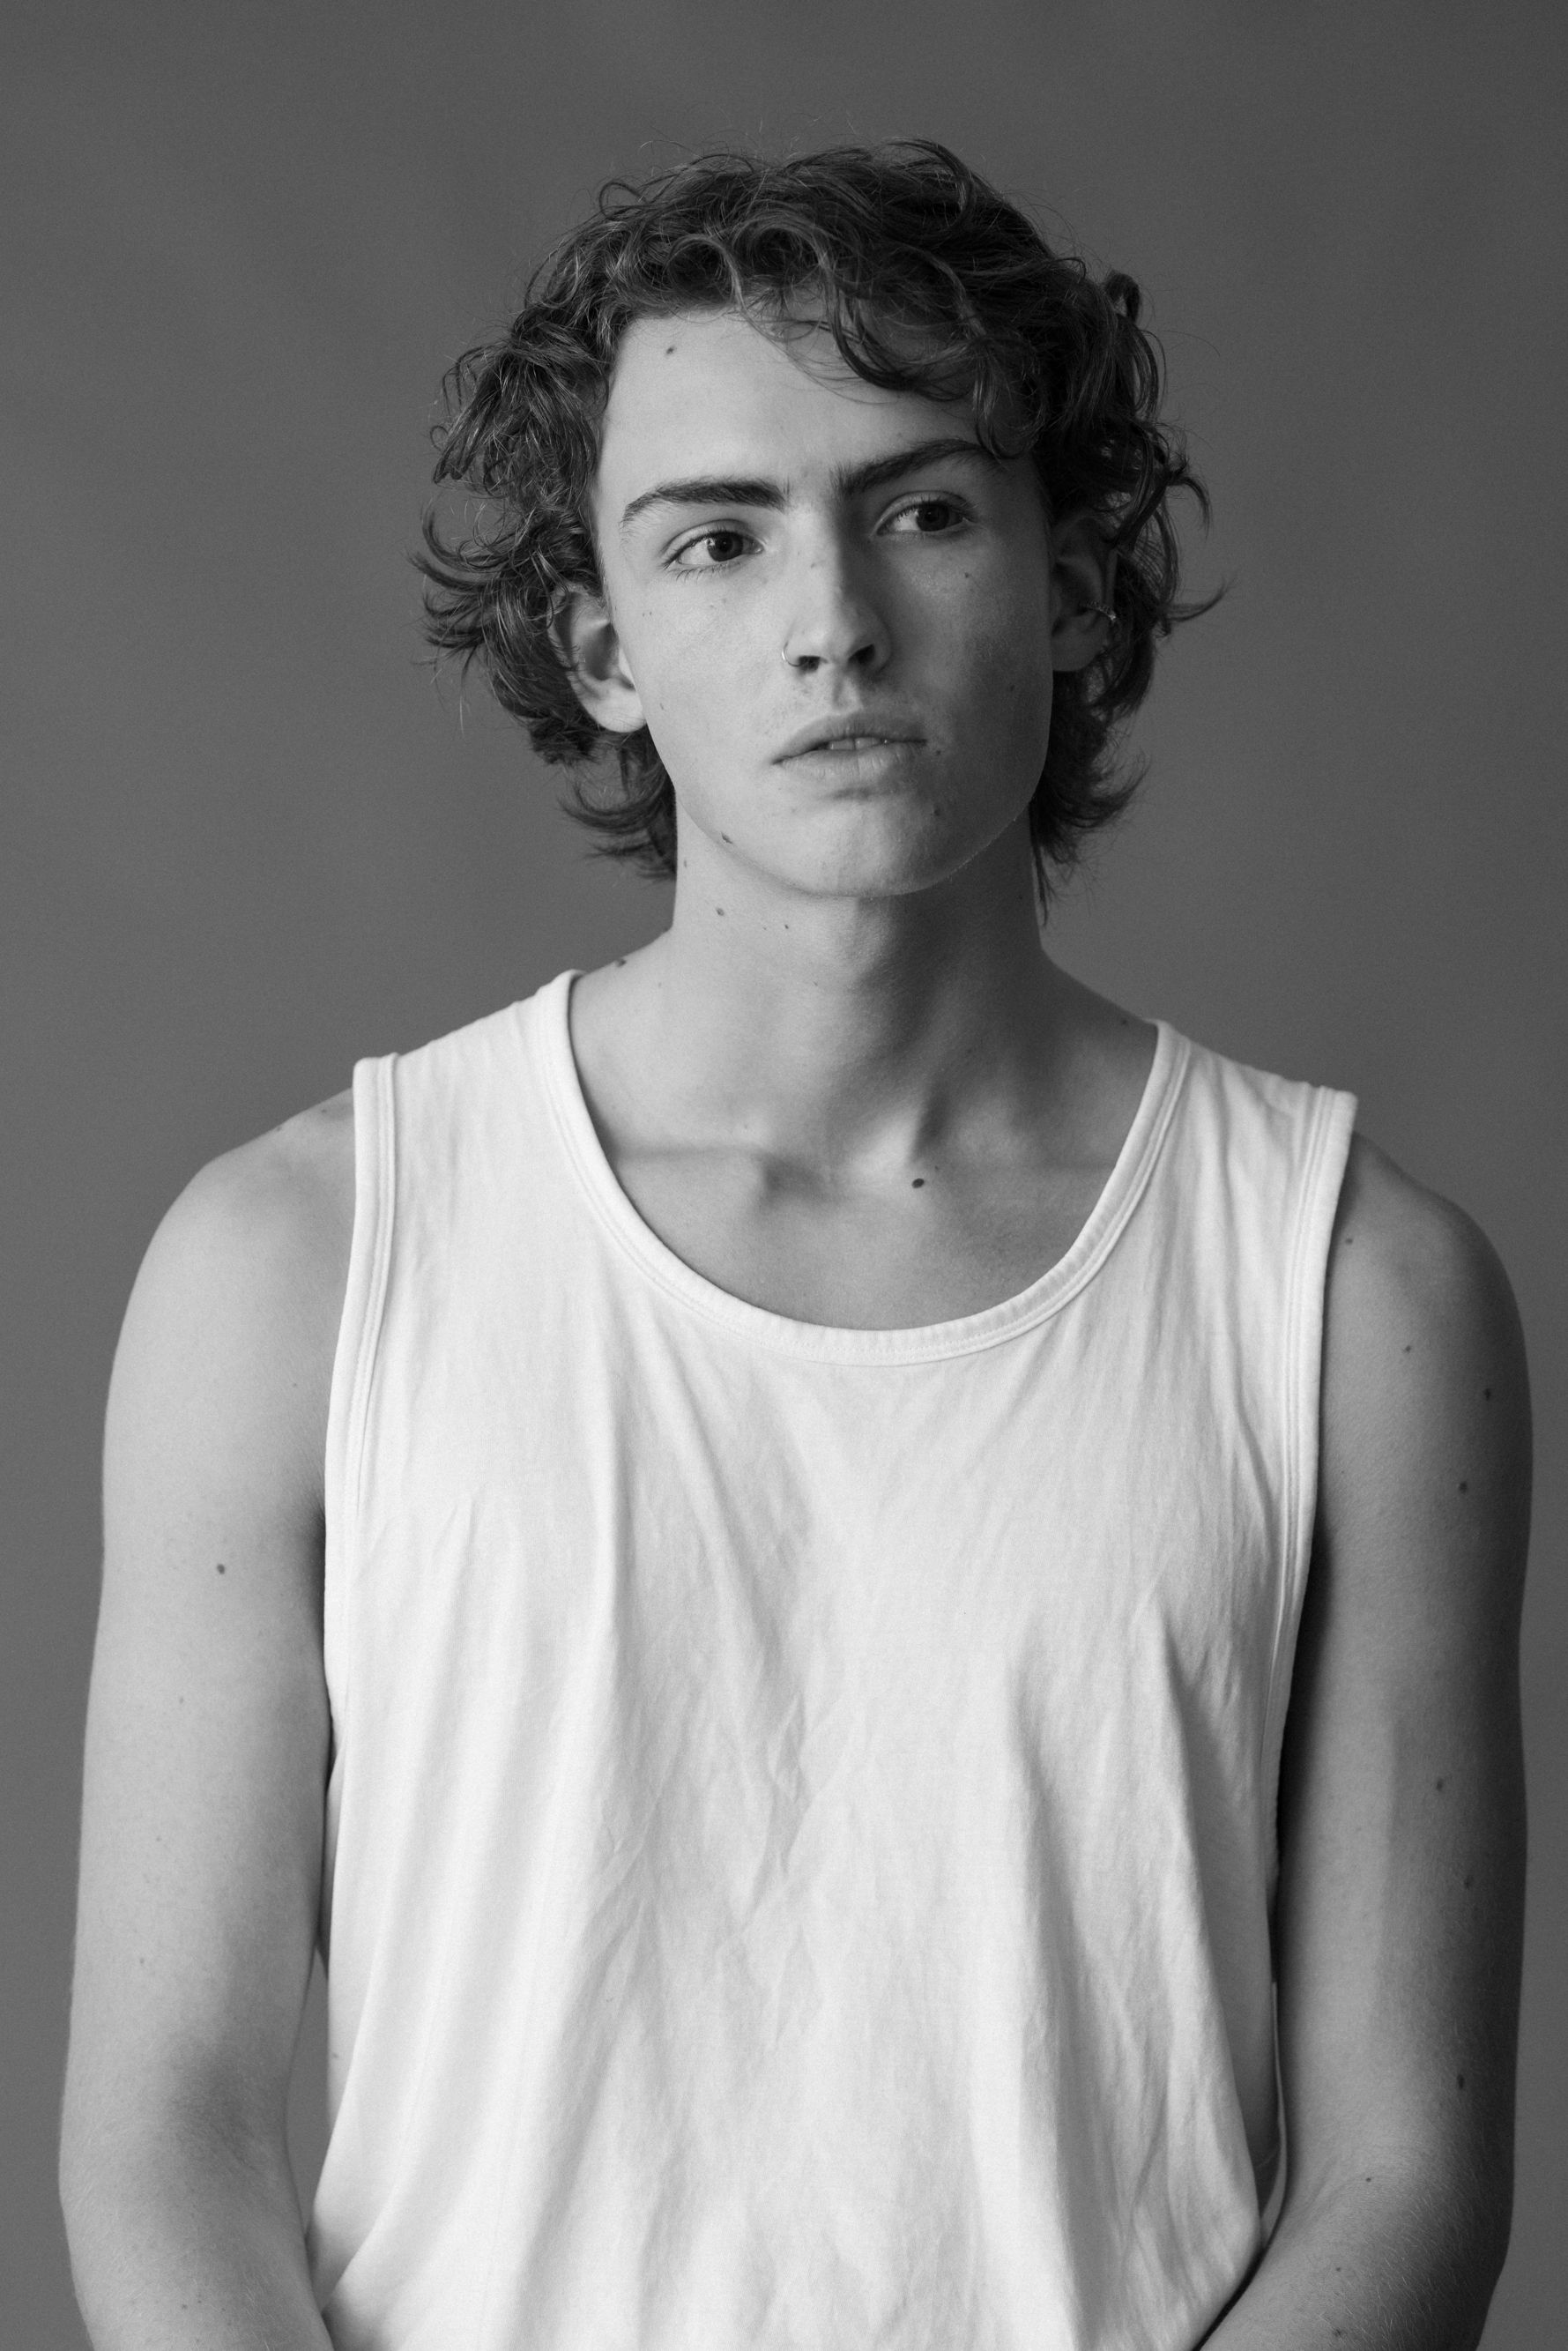 A young man with long hair and a white tank top